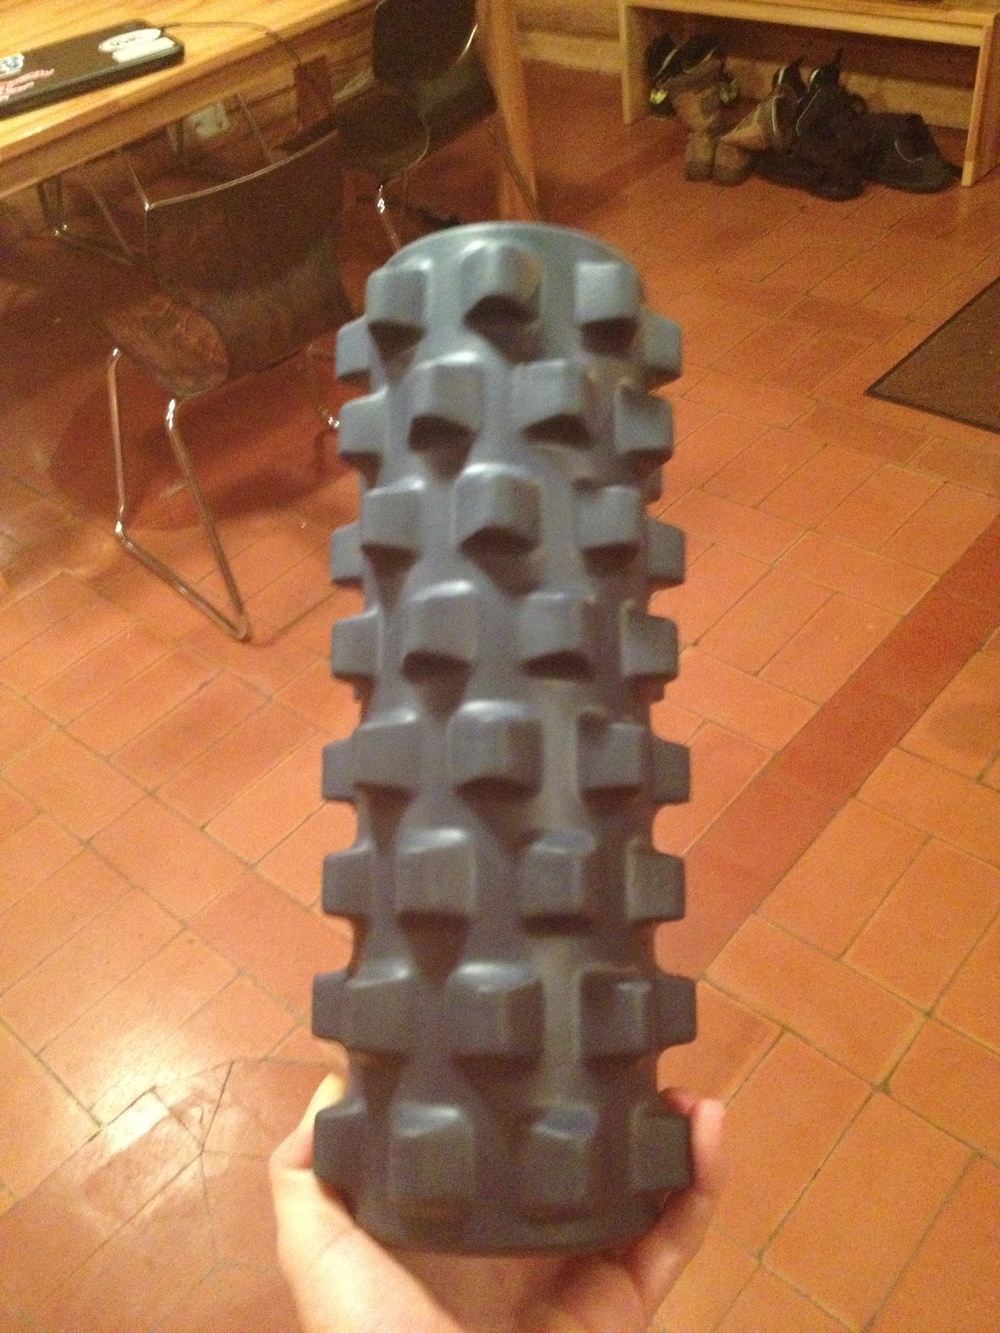 Jennie's torture-rolling device. I suppose those knobby bits are good for your muscles, but...